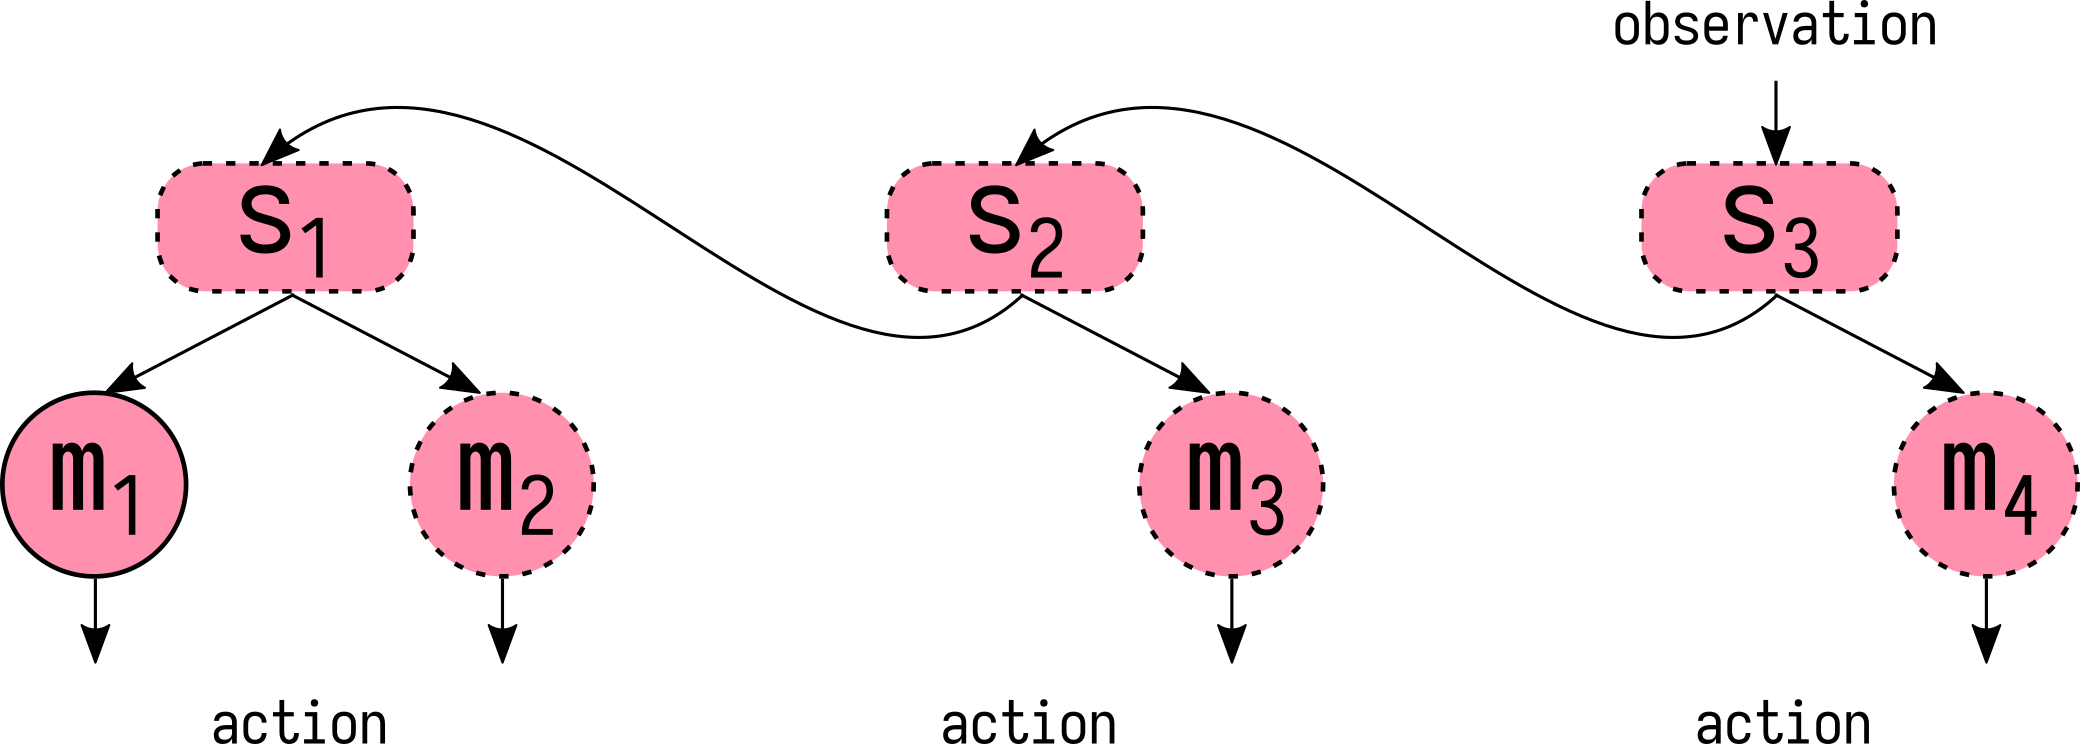 Hypothetical structure of a policy that has been extended multiple times.